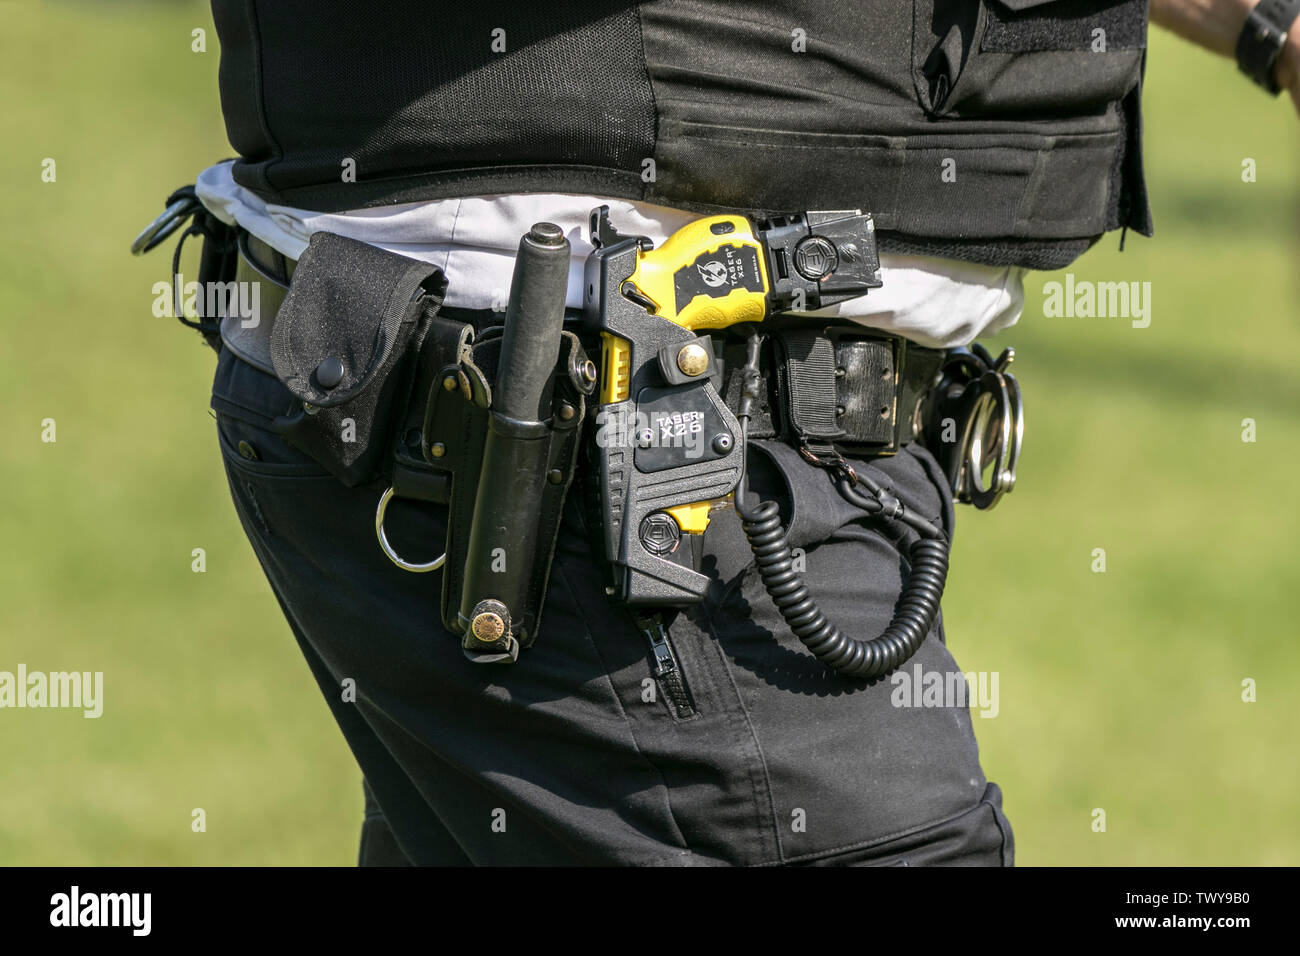 A UK armed police officer wearing a Taser stun gun as standard protective equipment to deter criminal from attacking police officers Stock Photo